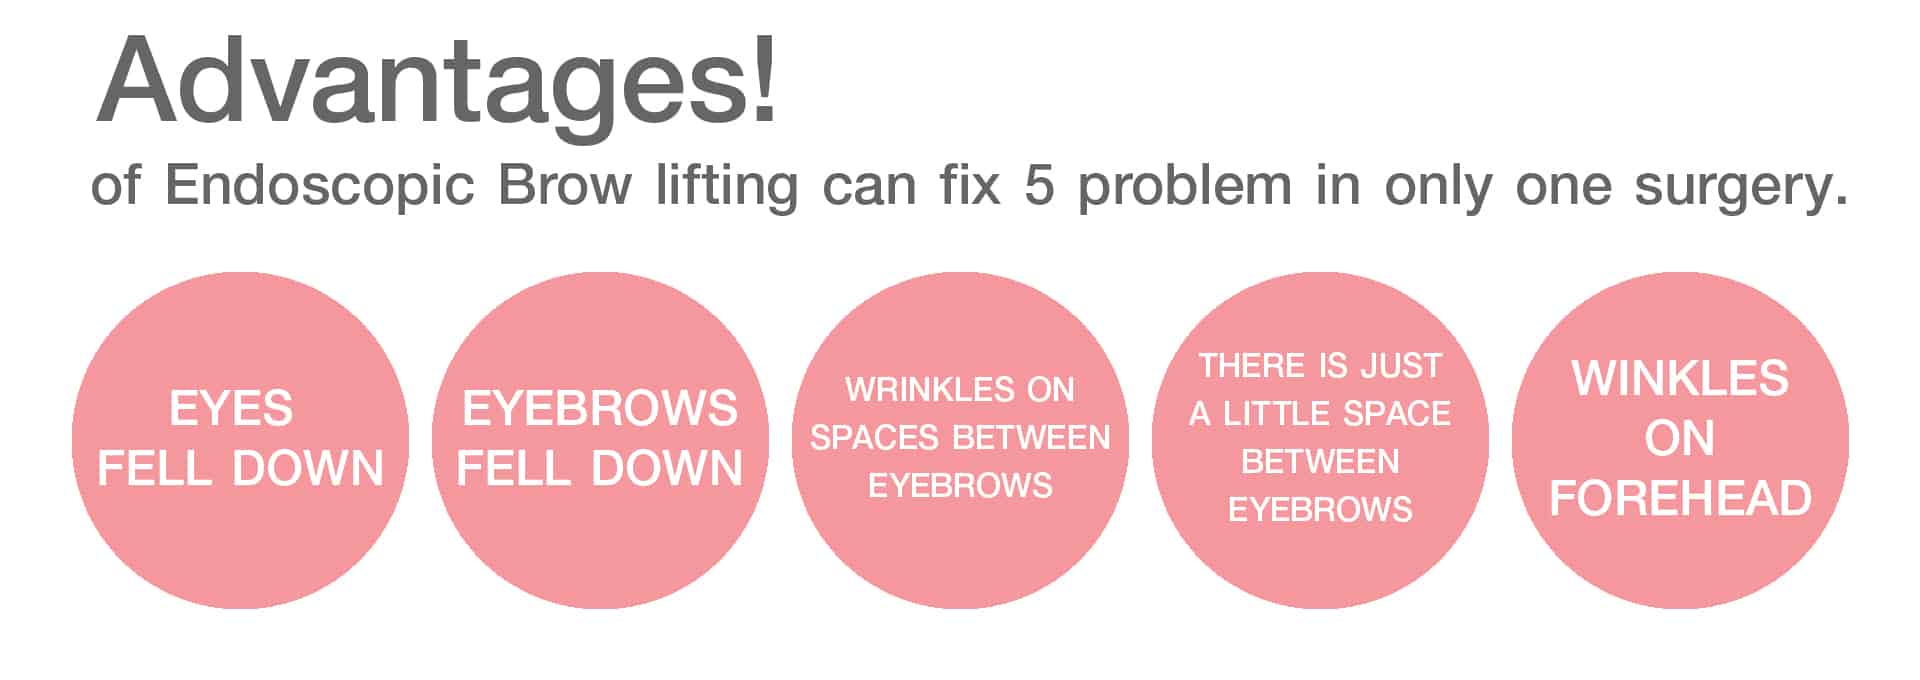 Advantages of Endoscopic Brow lifting can fix 5 problem in only one surgery.